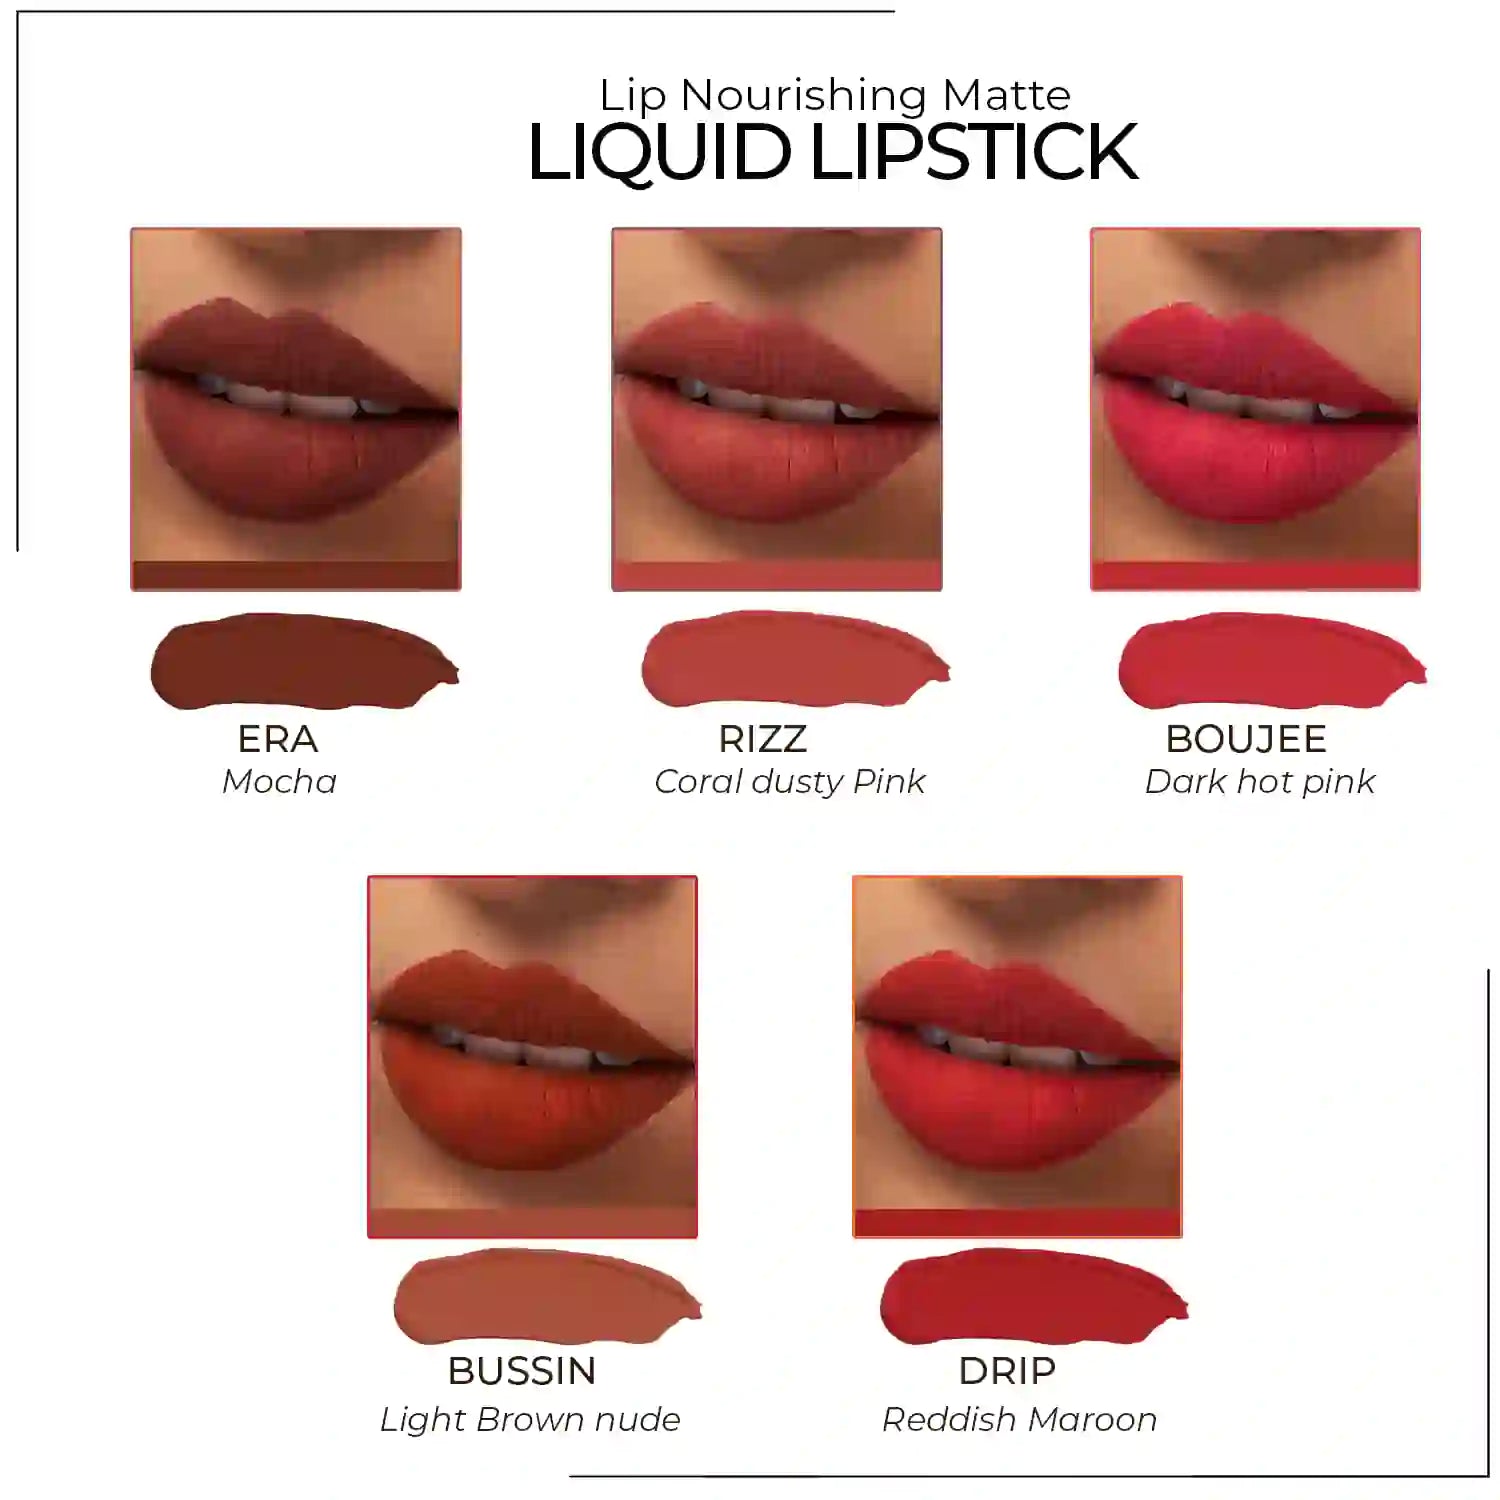 Whipped Mousse Liquid Matte Lipstick - Buy 1 Get 1 Free